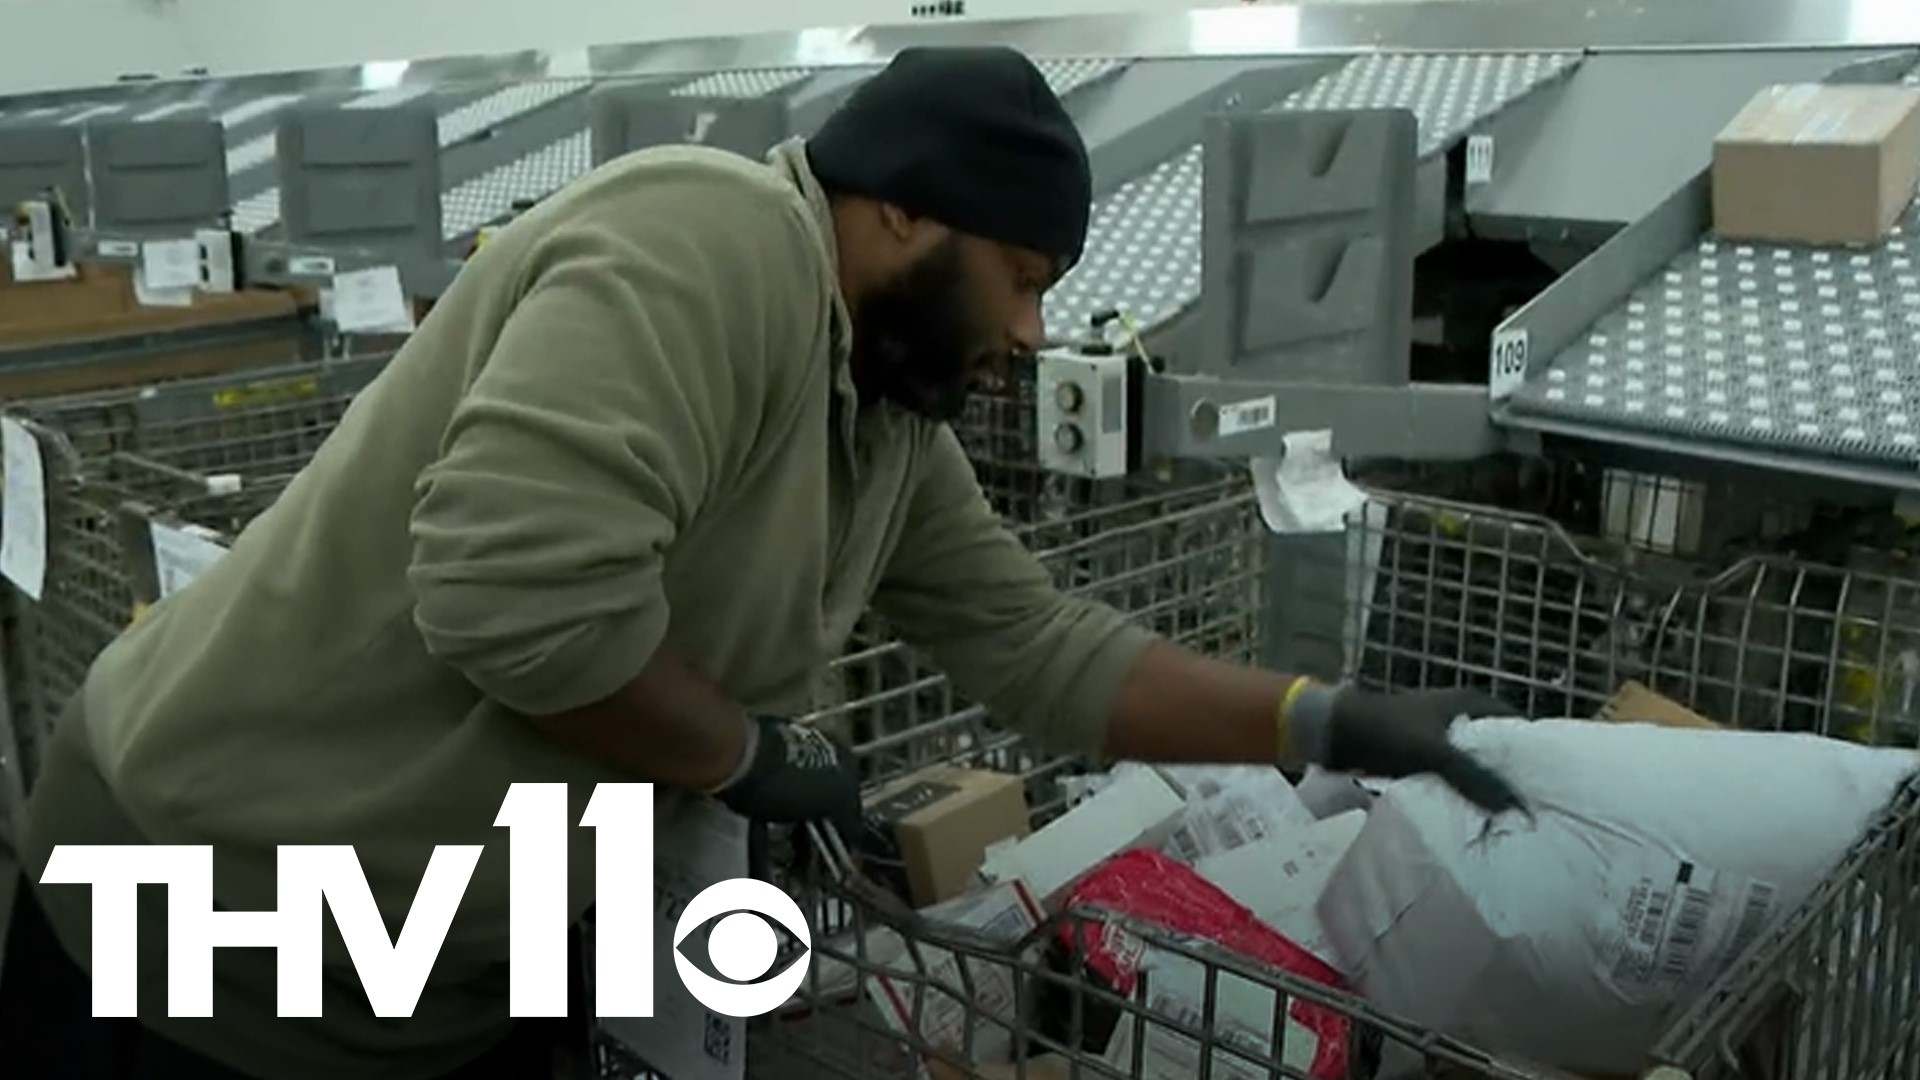 USPS processing plant employees are working as hard as Santa to ensure packages are delivered in time for Christmas. Here’s a look at how they make it happen.